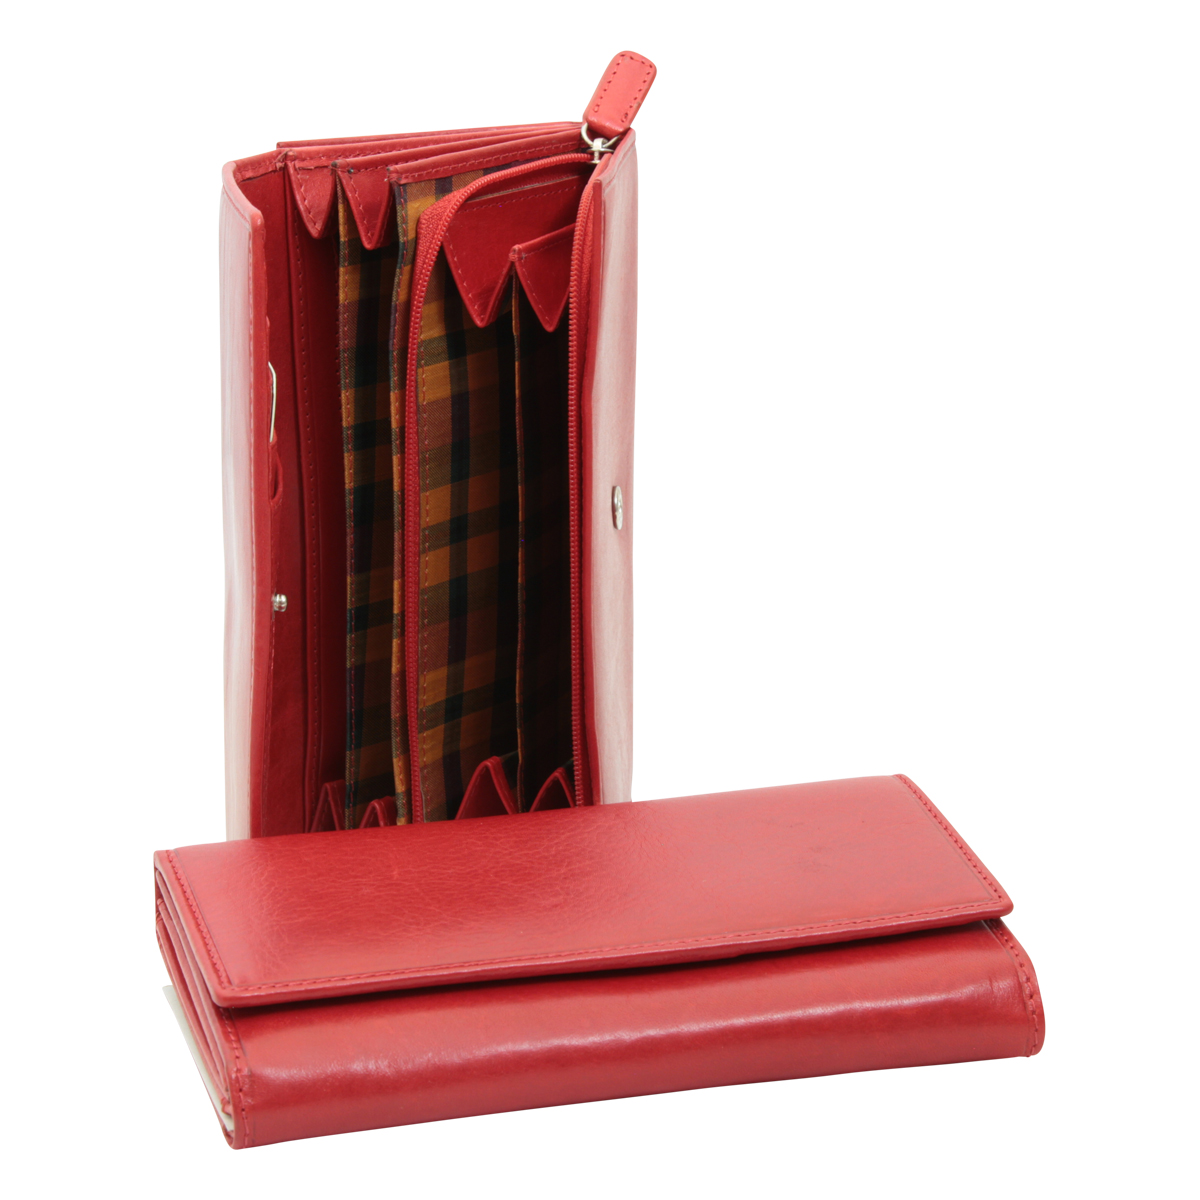 Women's leather wallet - red | 503289RO UK | Old Angler Firenze